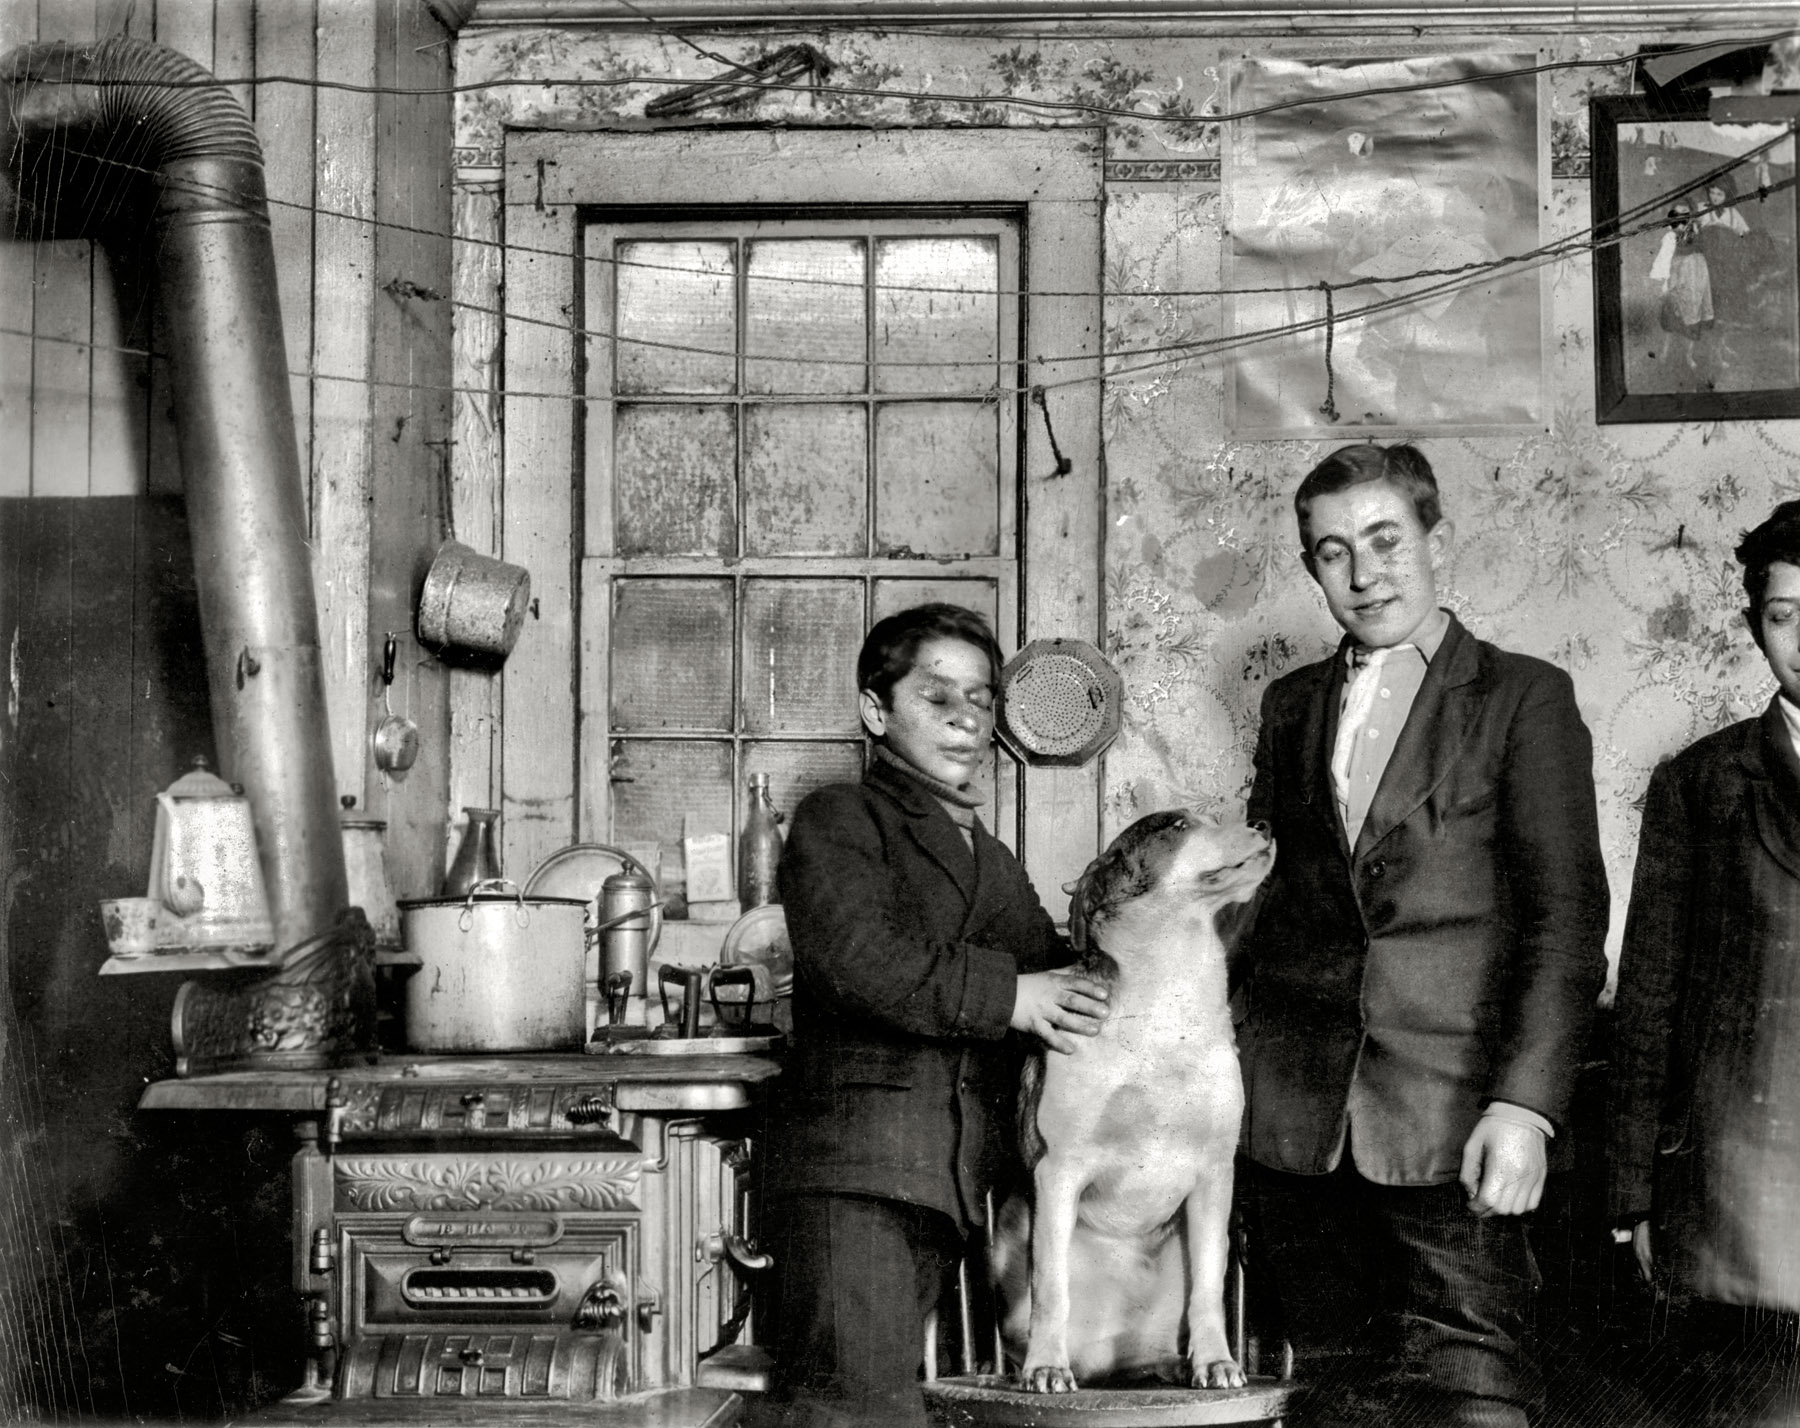 February 1910. Buffalo, New York. "Home of the Palia family, 260 Terrace Street. The boy, Amorica, center, goes to the canning factory with his mother in summer." Photograph and caption by Lewis Wickes Hine. View full size.